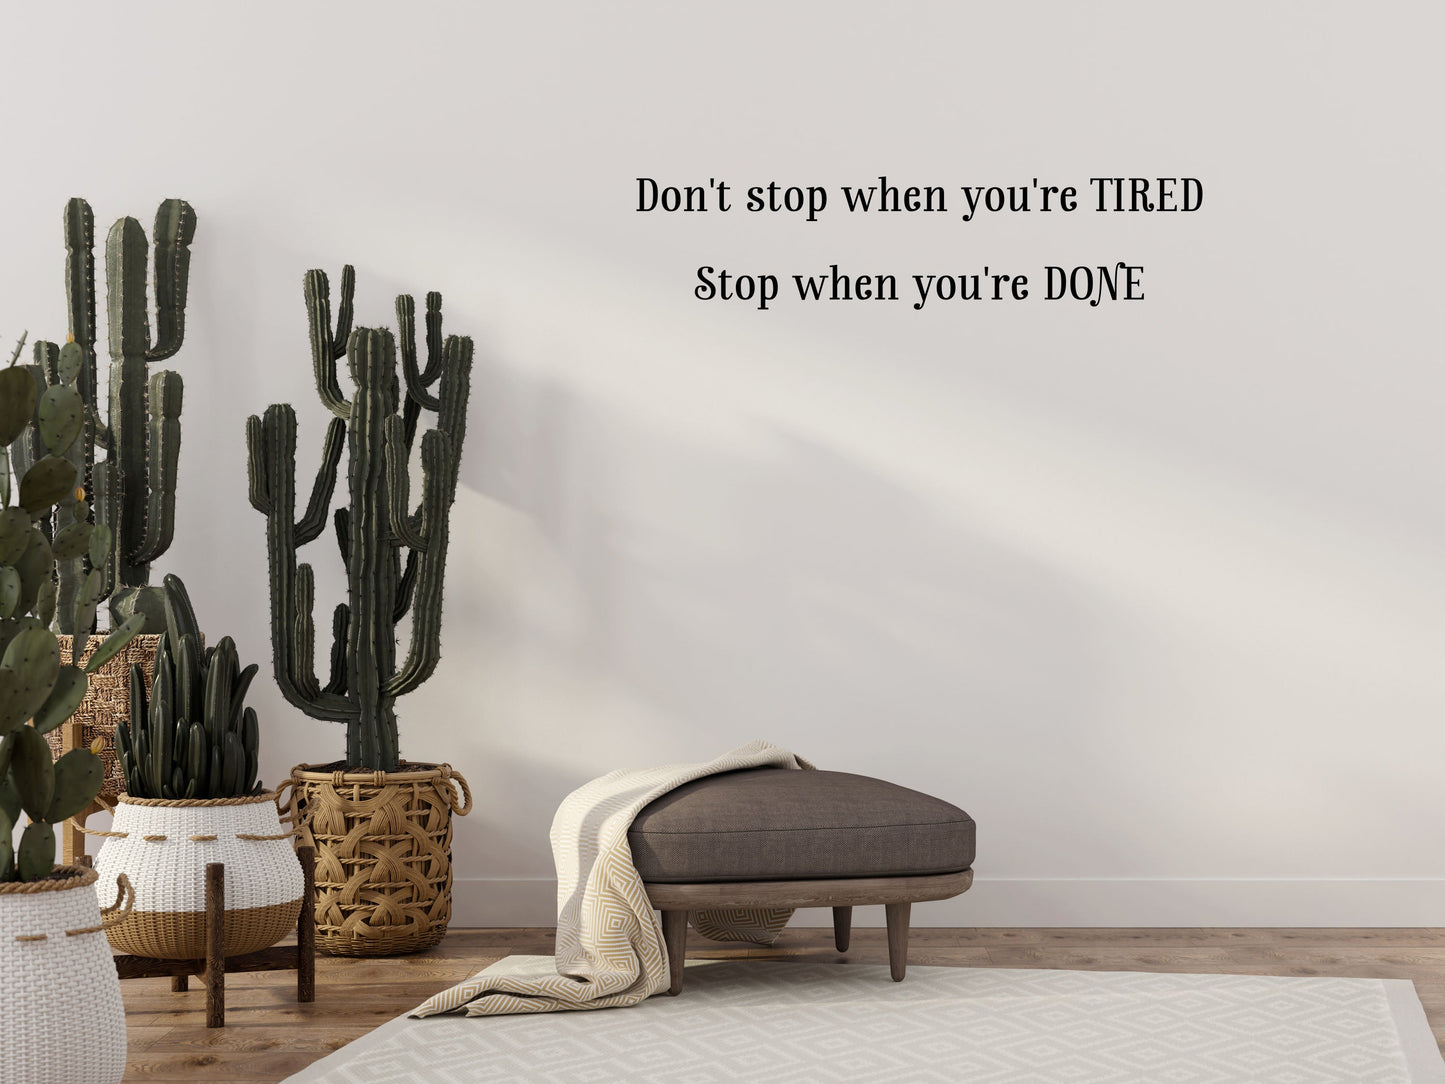 Don't Stop When You're Tired Stop When You're Done - Inspirational Wall Decals Vinyl Wall Decal Inspirational Wall Signs 